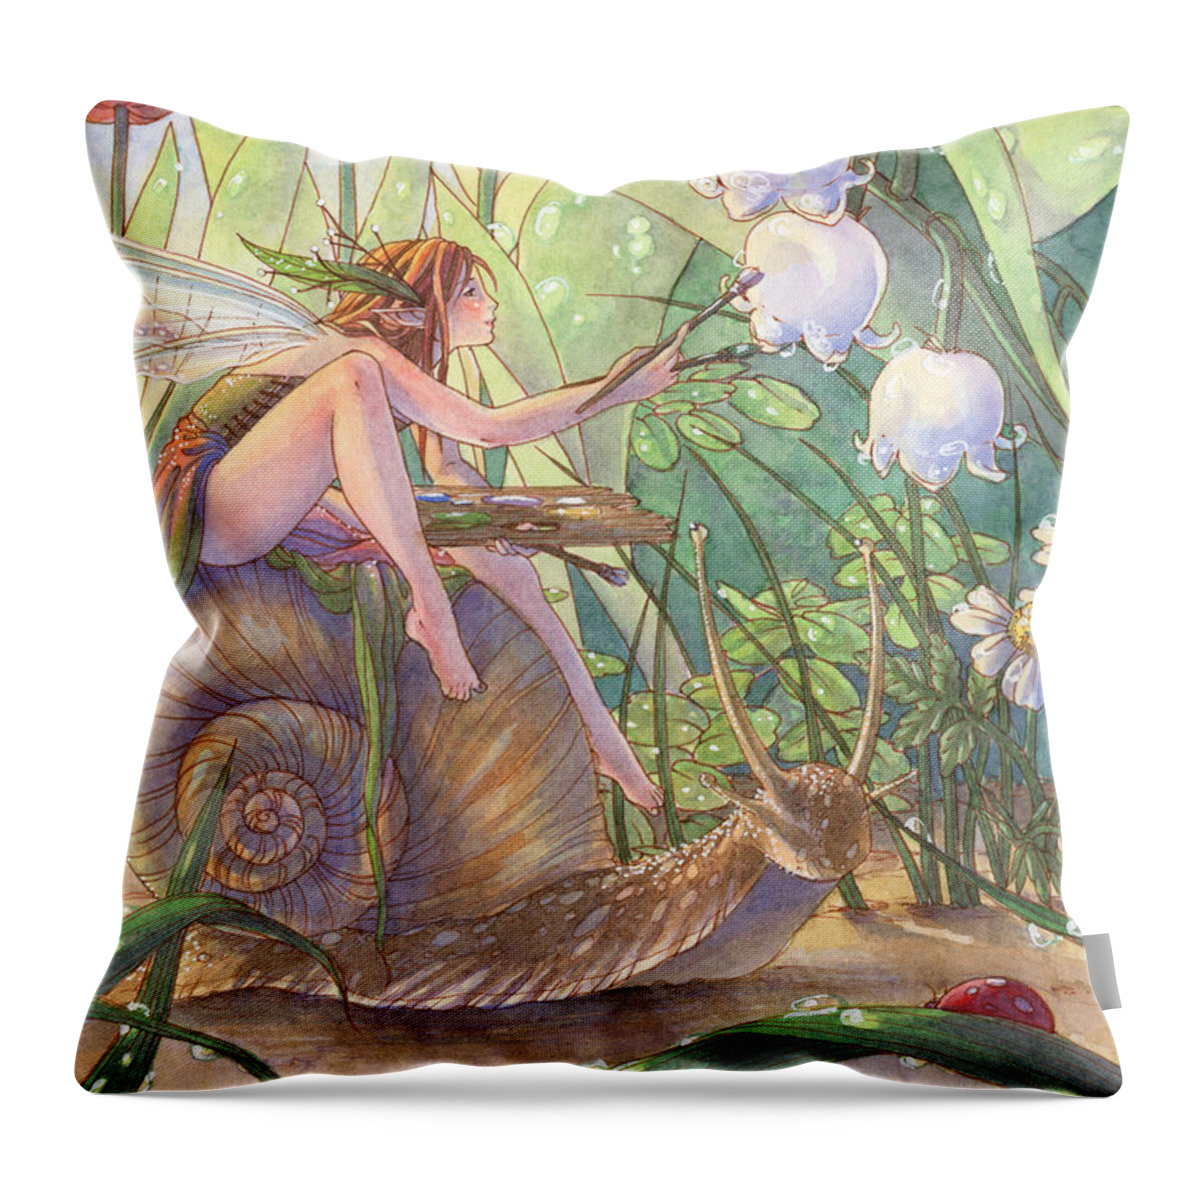 Fairy Throw Pillow featuring the painting Morning Hues by Sara Burrier